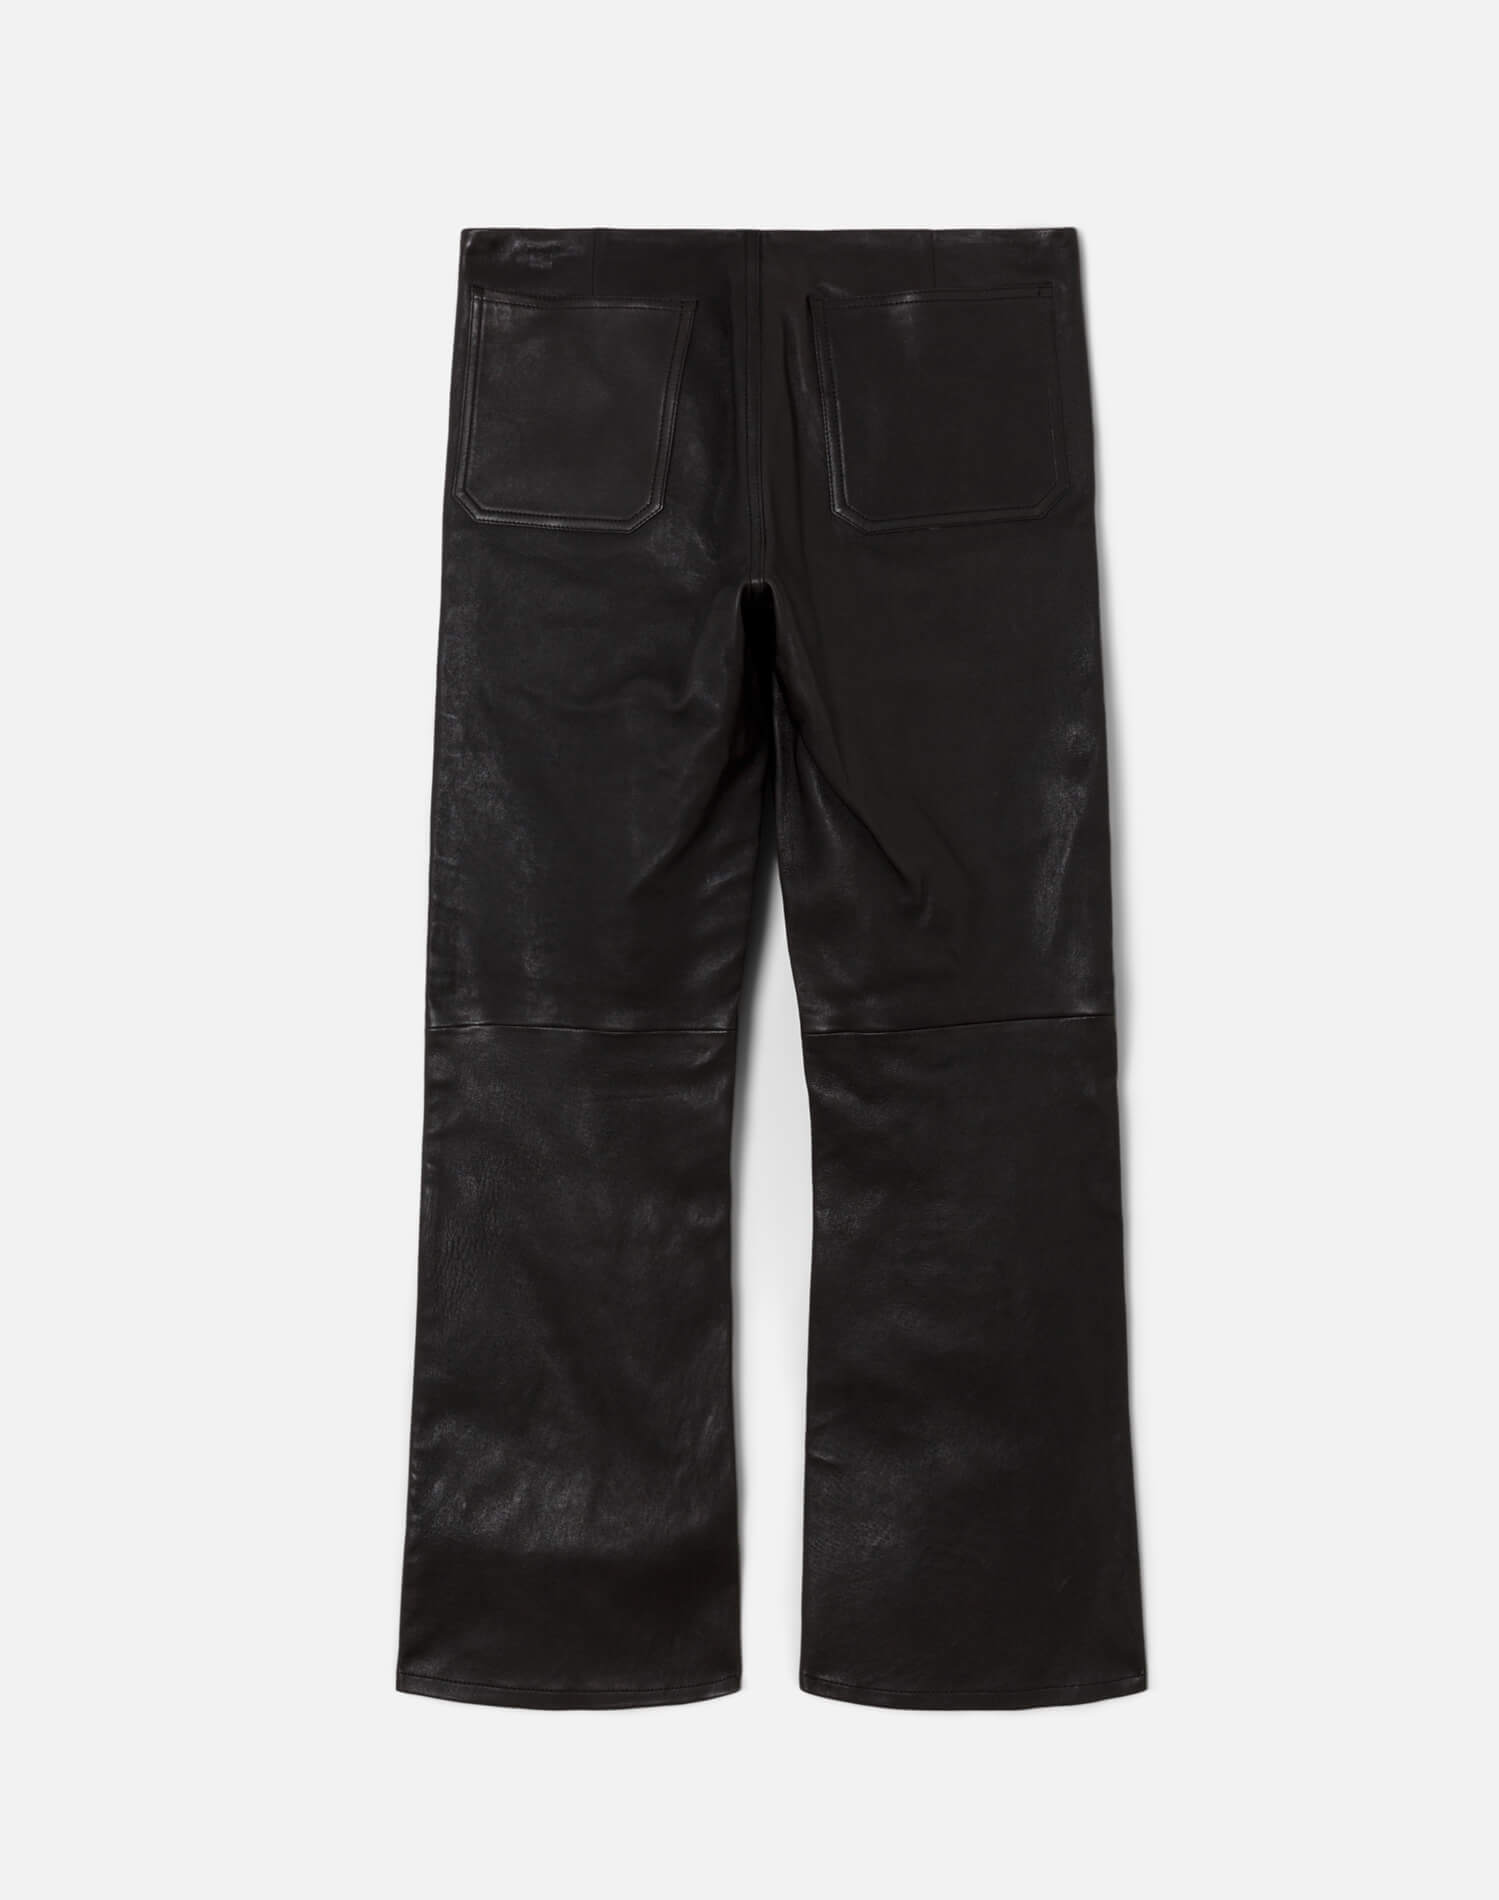 Leather Snap Front Crop Boot Pant - Black Leather